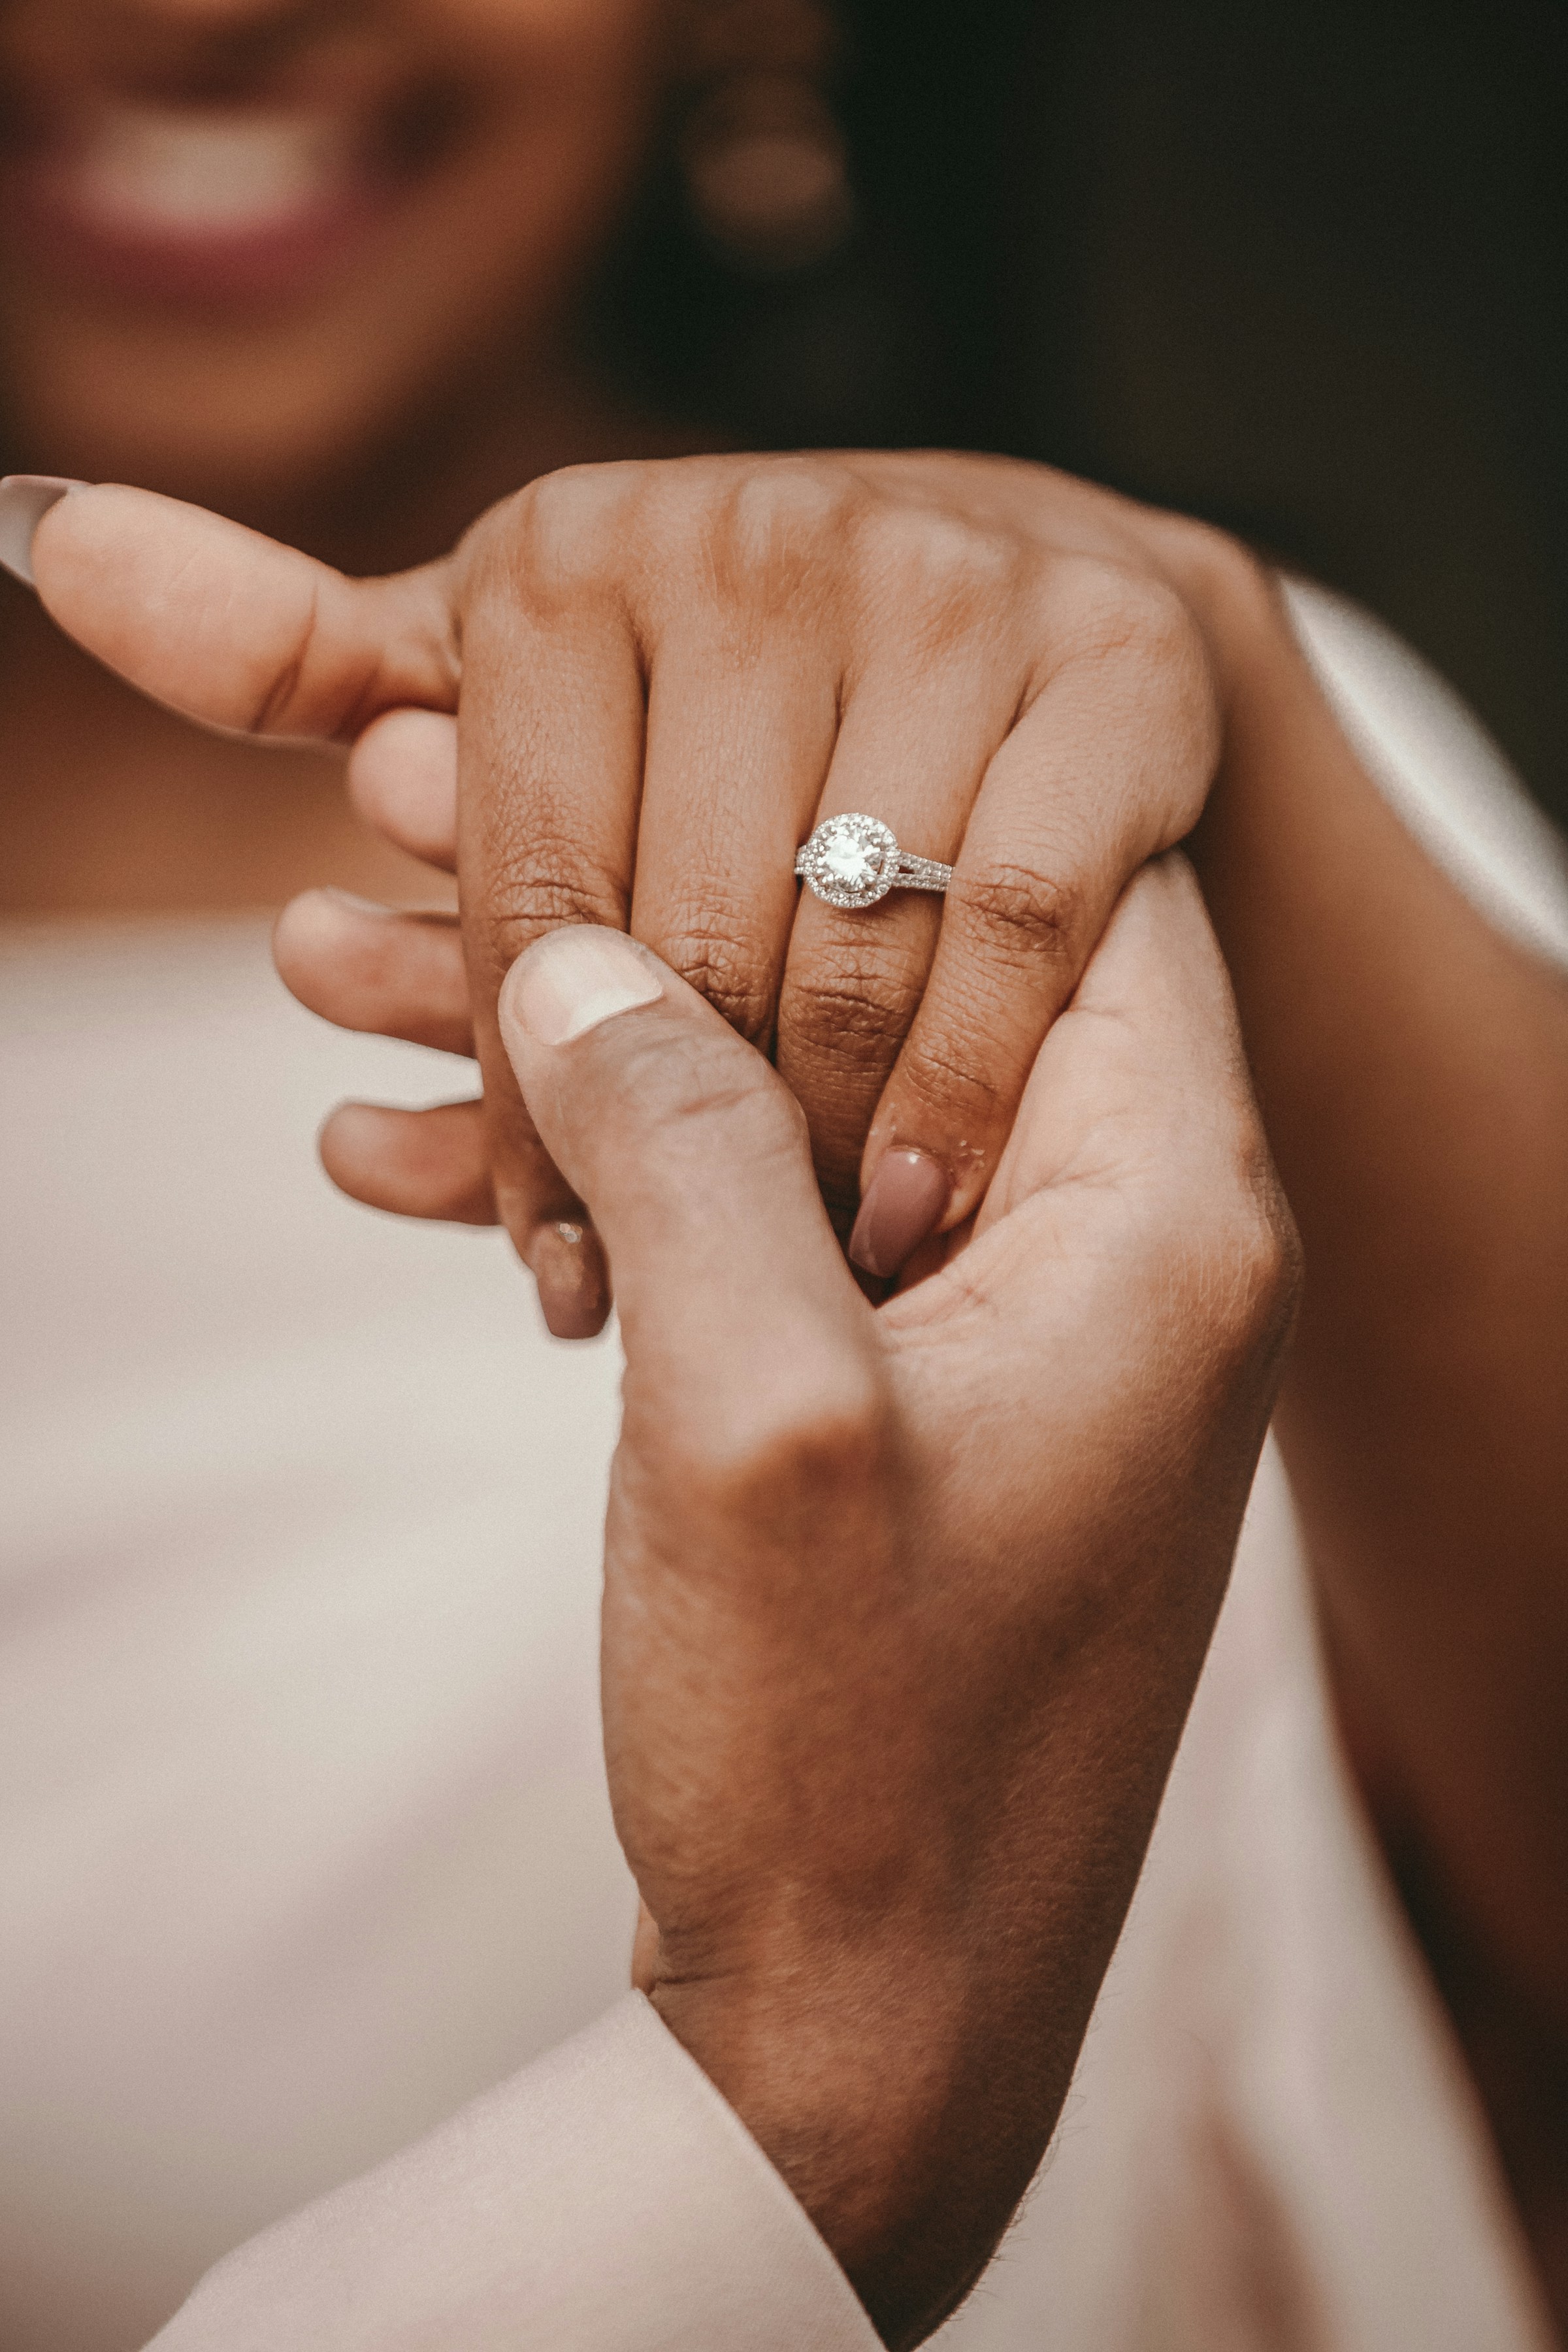 A close-up of an engagement ring | Source: Unsplash